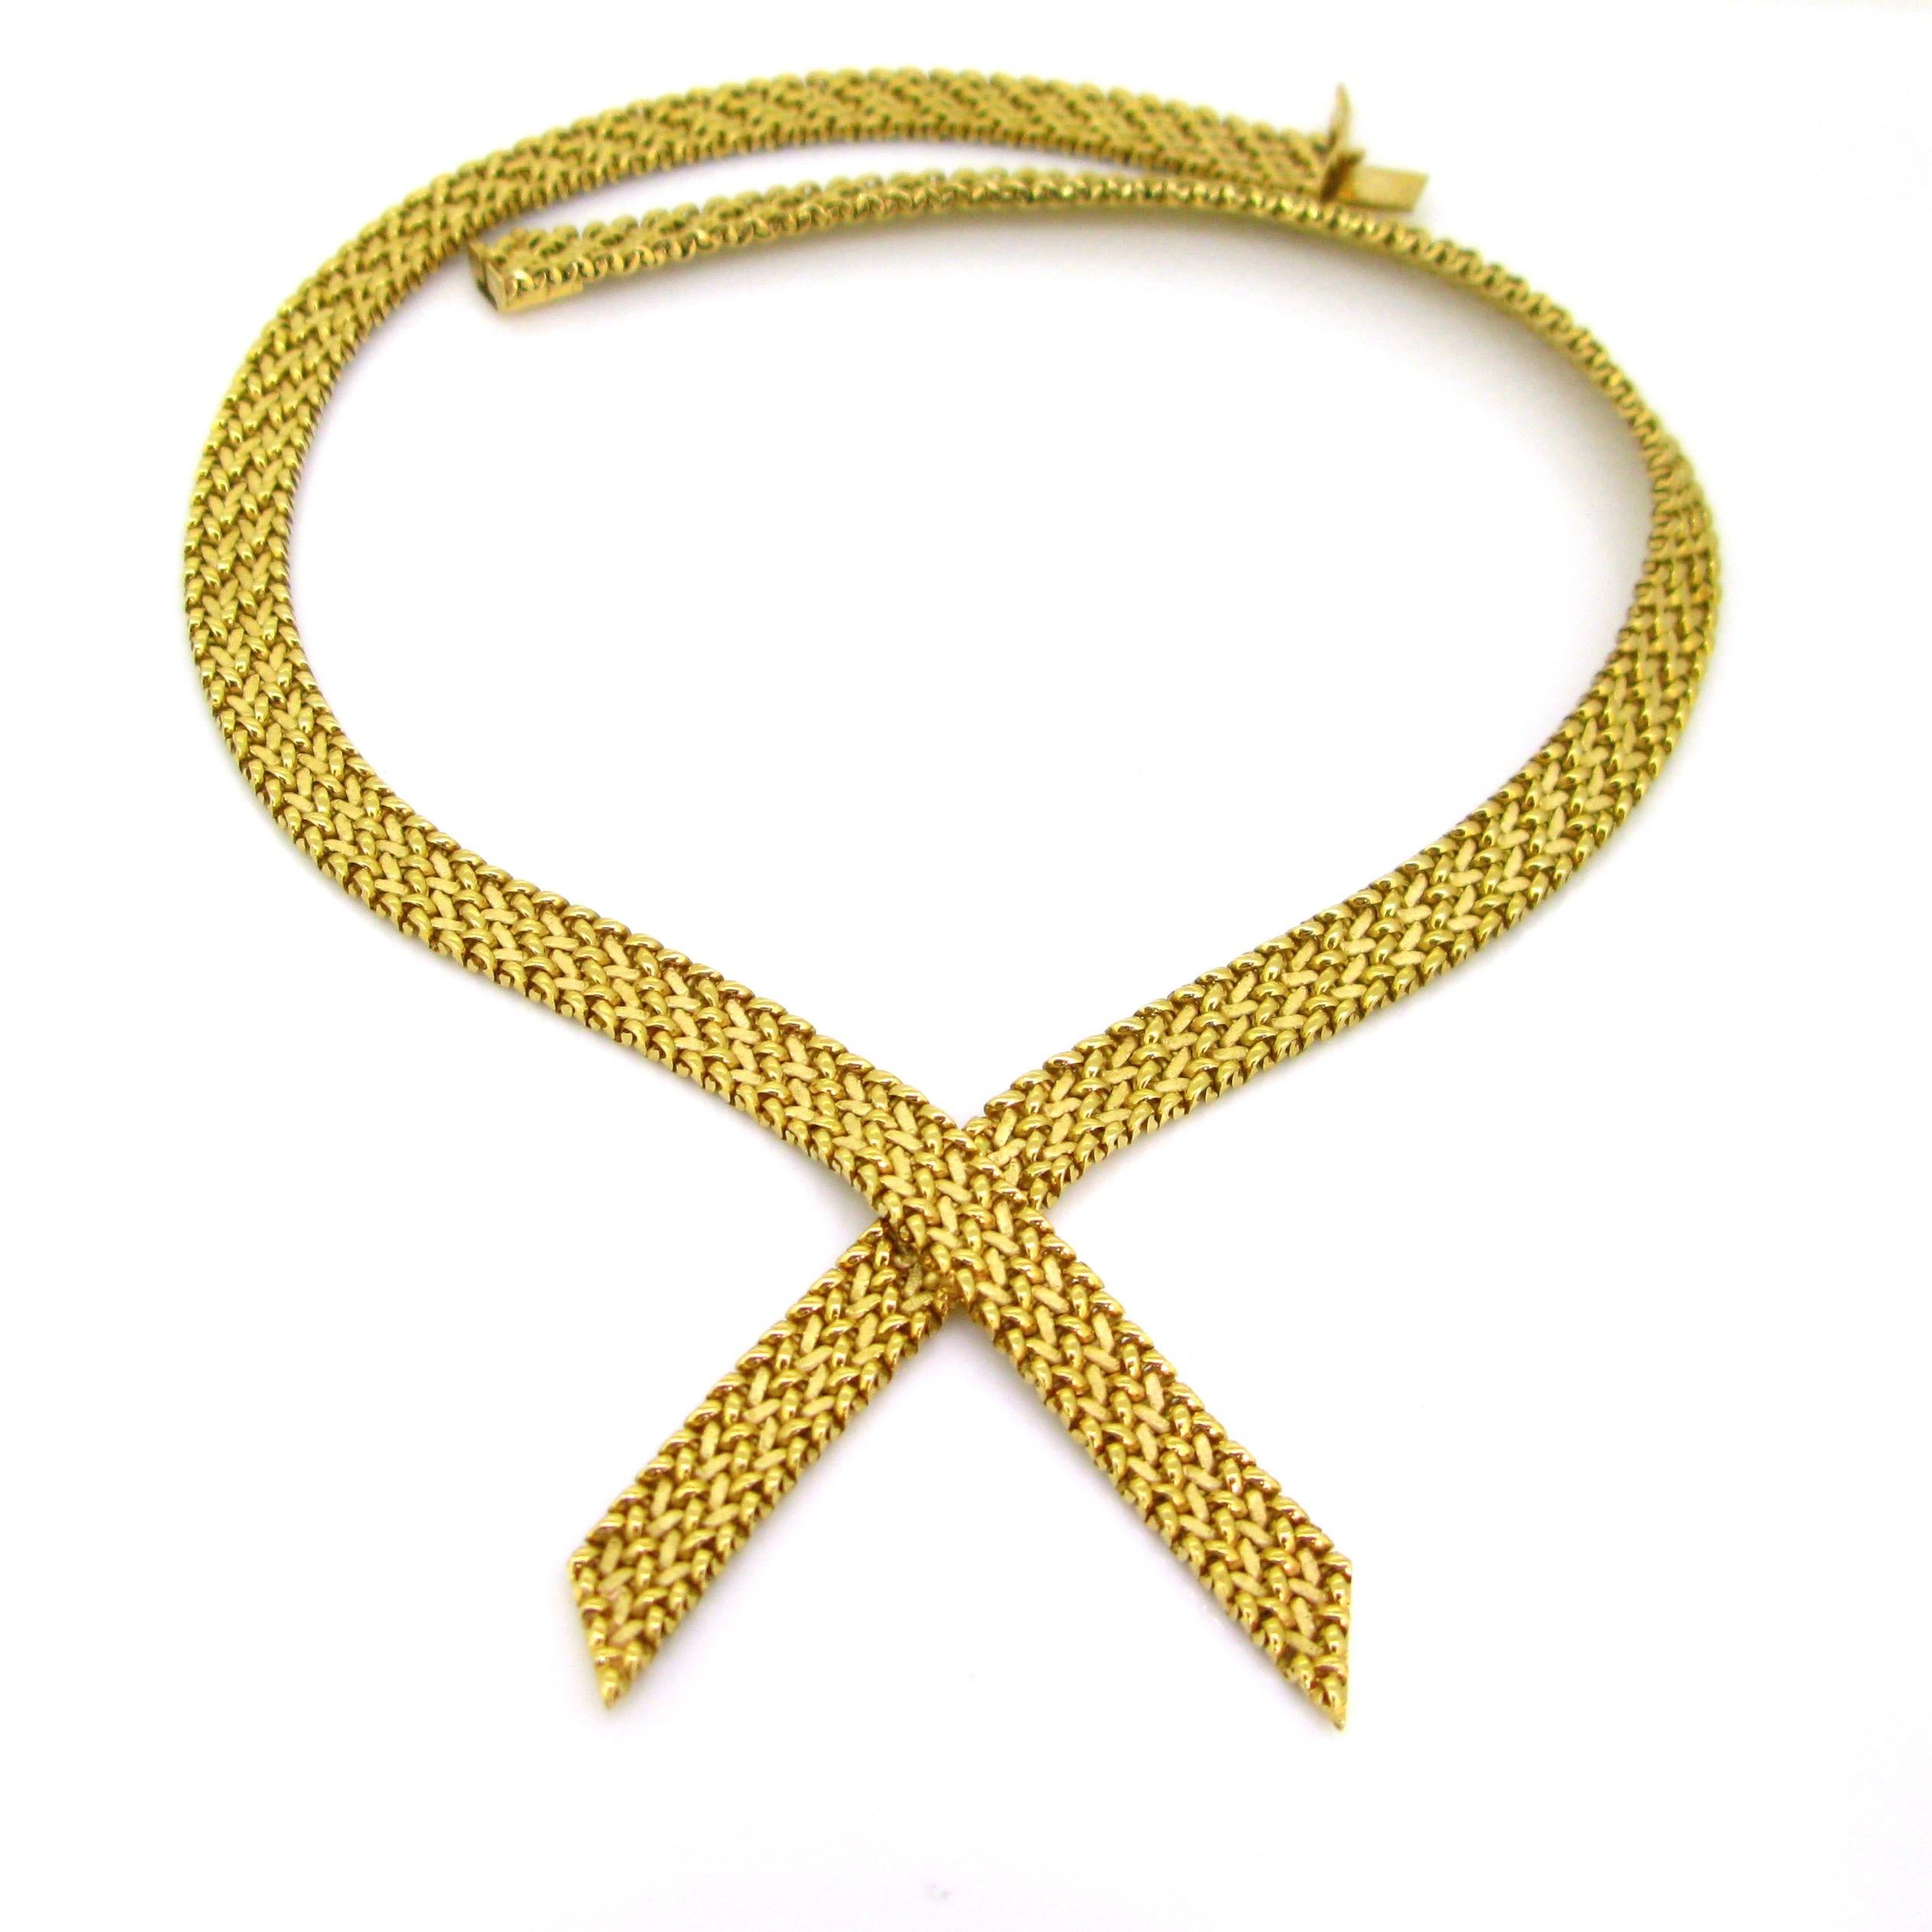 Women's or Men's Woven Mesh Yellow Gold Necklace